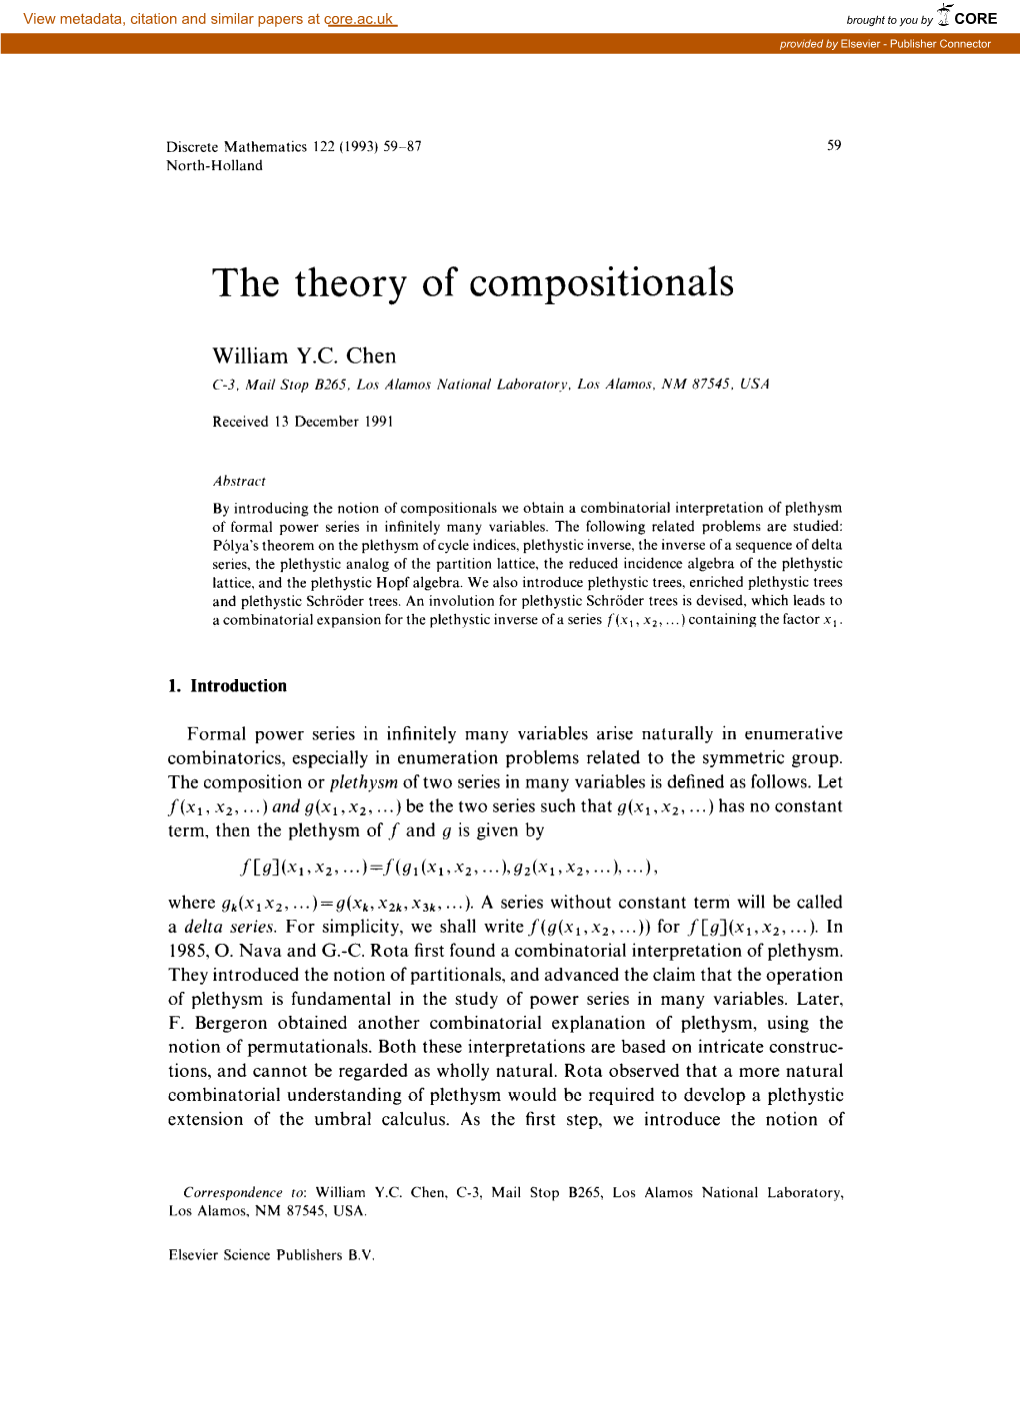 The Theory of Compositionals